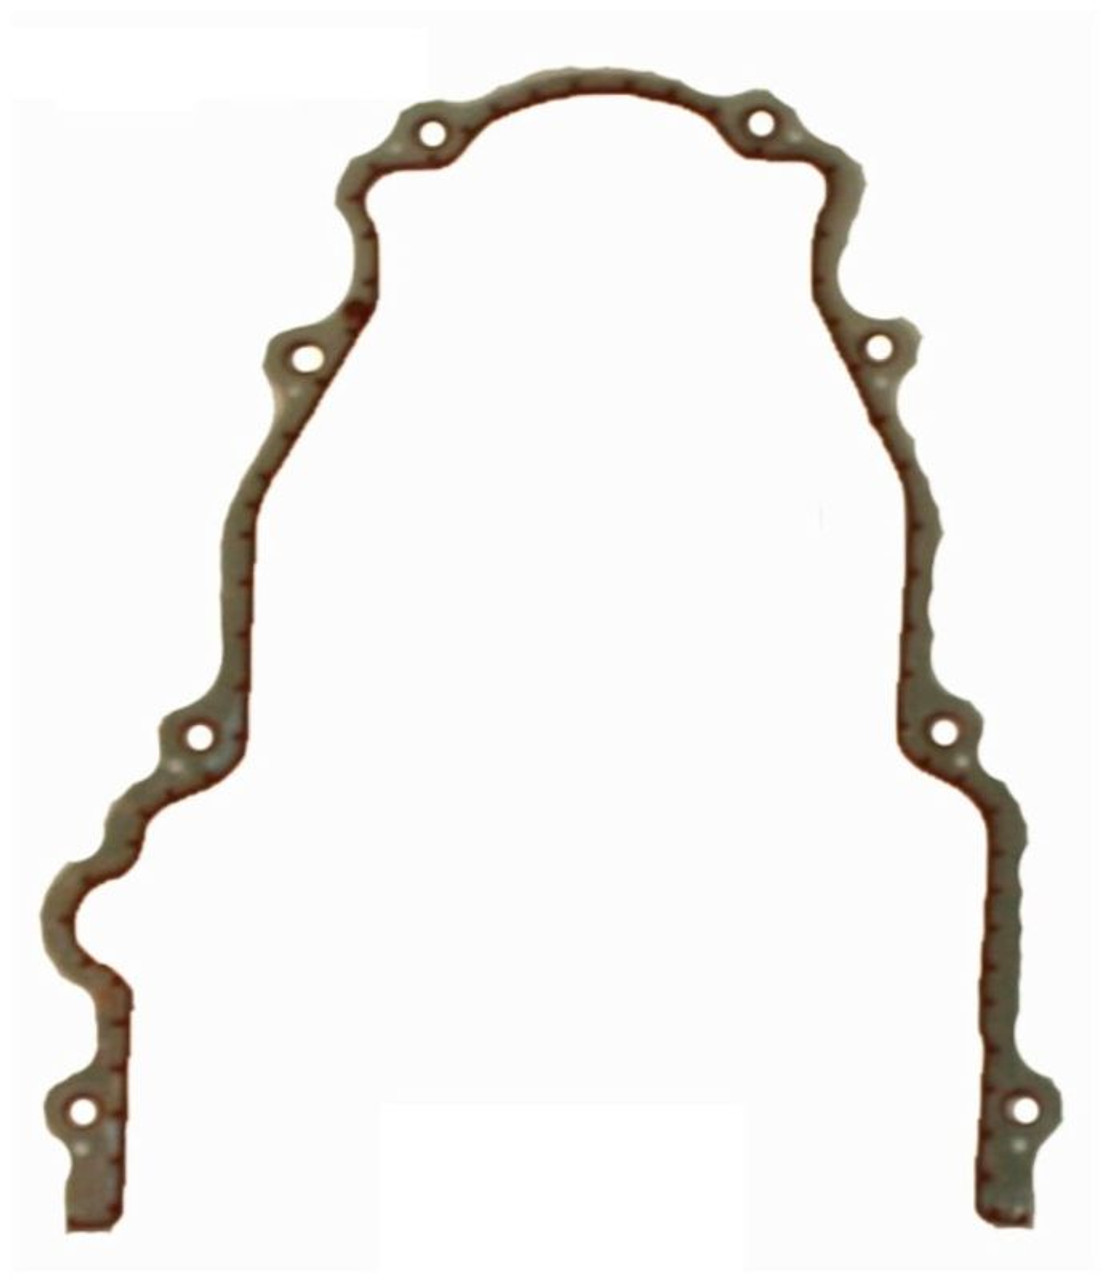 2013 Chevrolet Express 3500 6.0L Engine Timing Cover Gasket TCG293-A -825